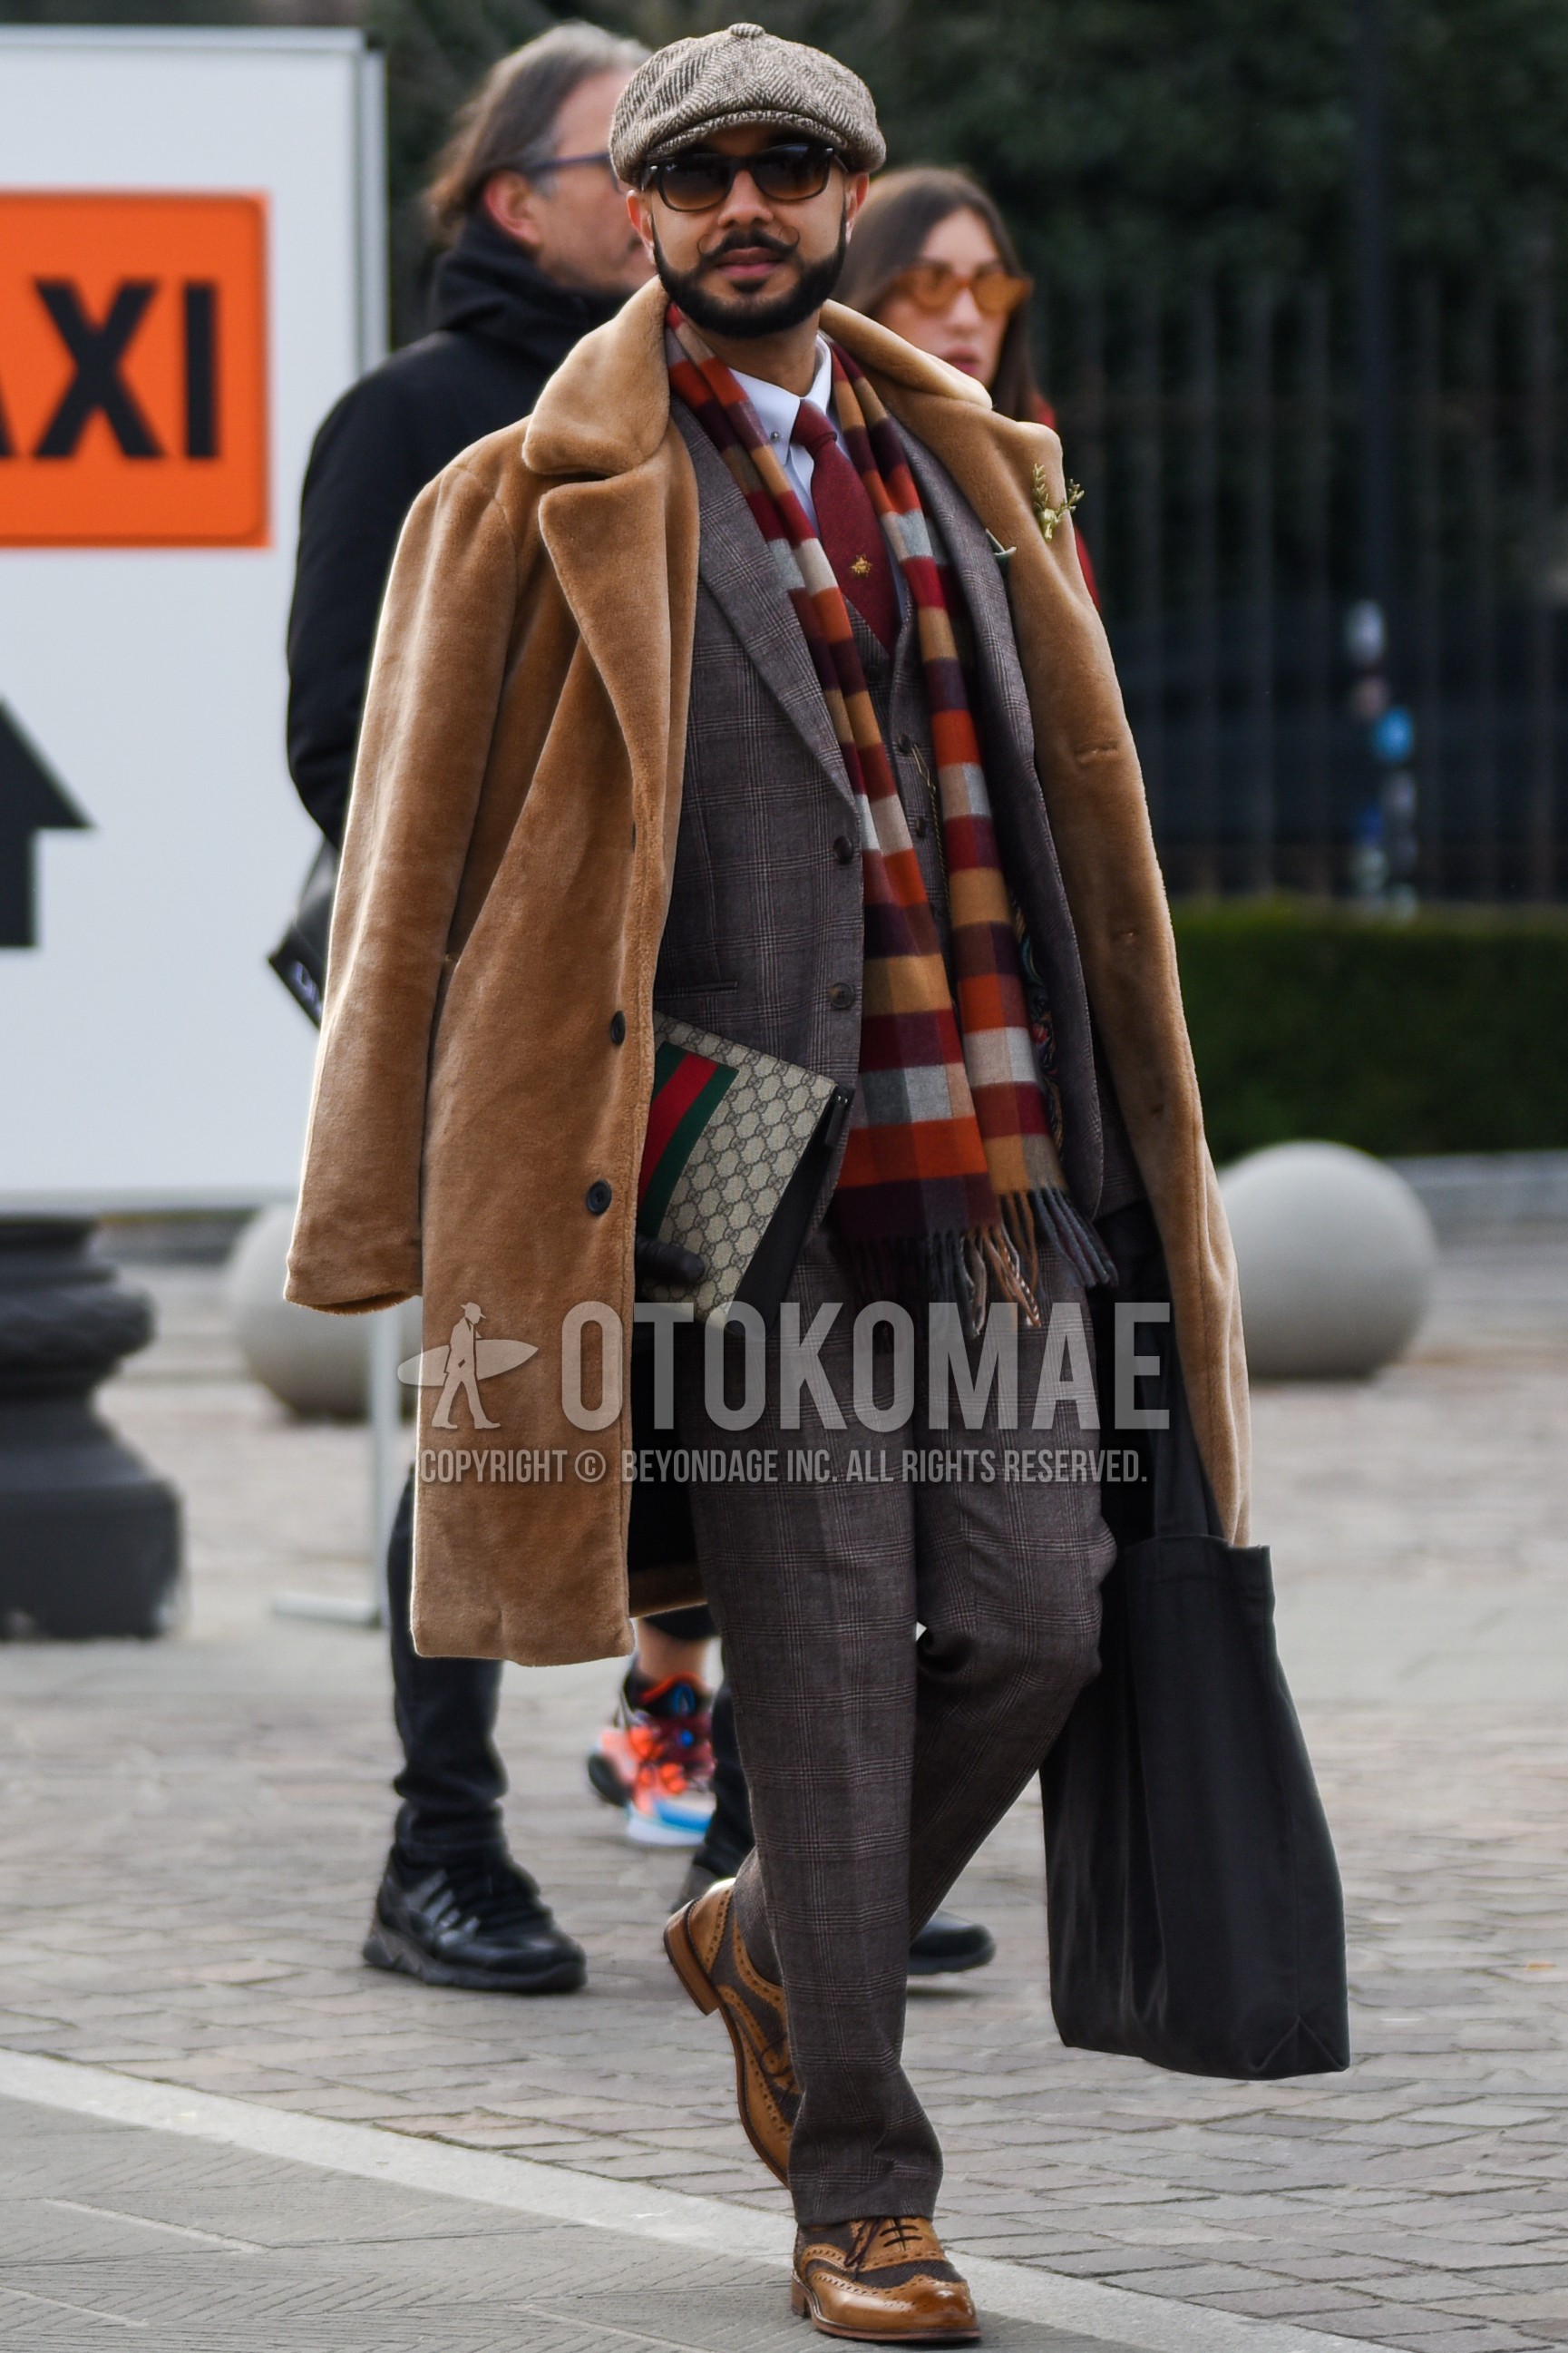 Men's winter outfit with gray herringbone hunting cap, brown plain sunglasses, multi-color check scarf, brown plain chester coat, white plain shirt, brown wing-tip shoes leather shoes, beige bag clutch bag/second bag/drawstring bag, gray check three-piece suit, red one point necktie.